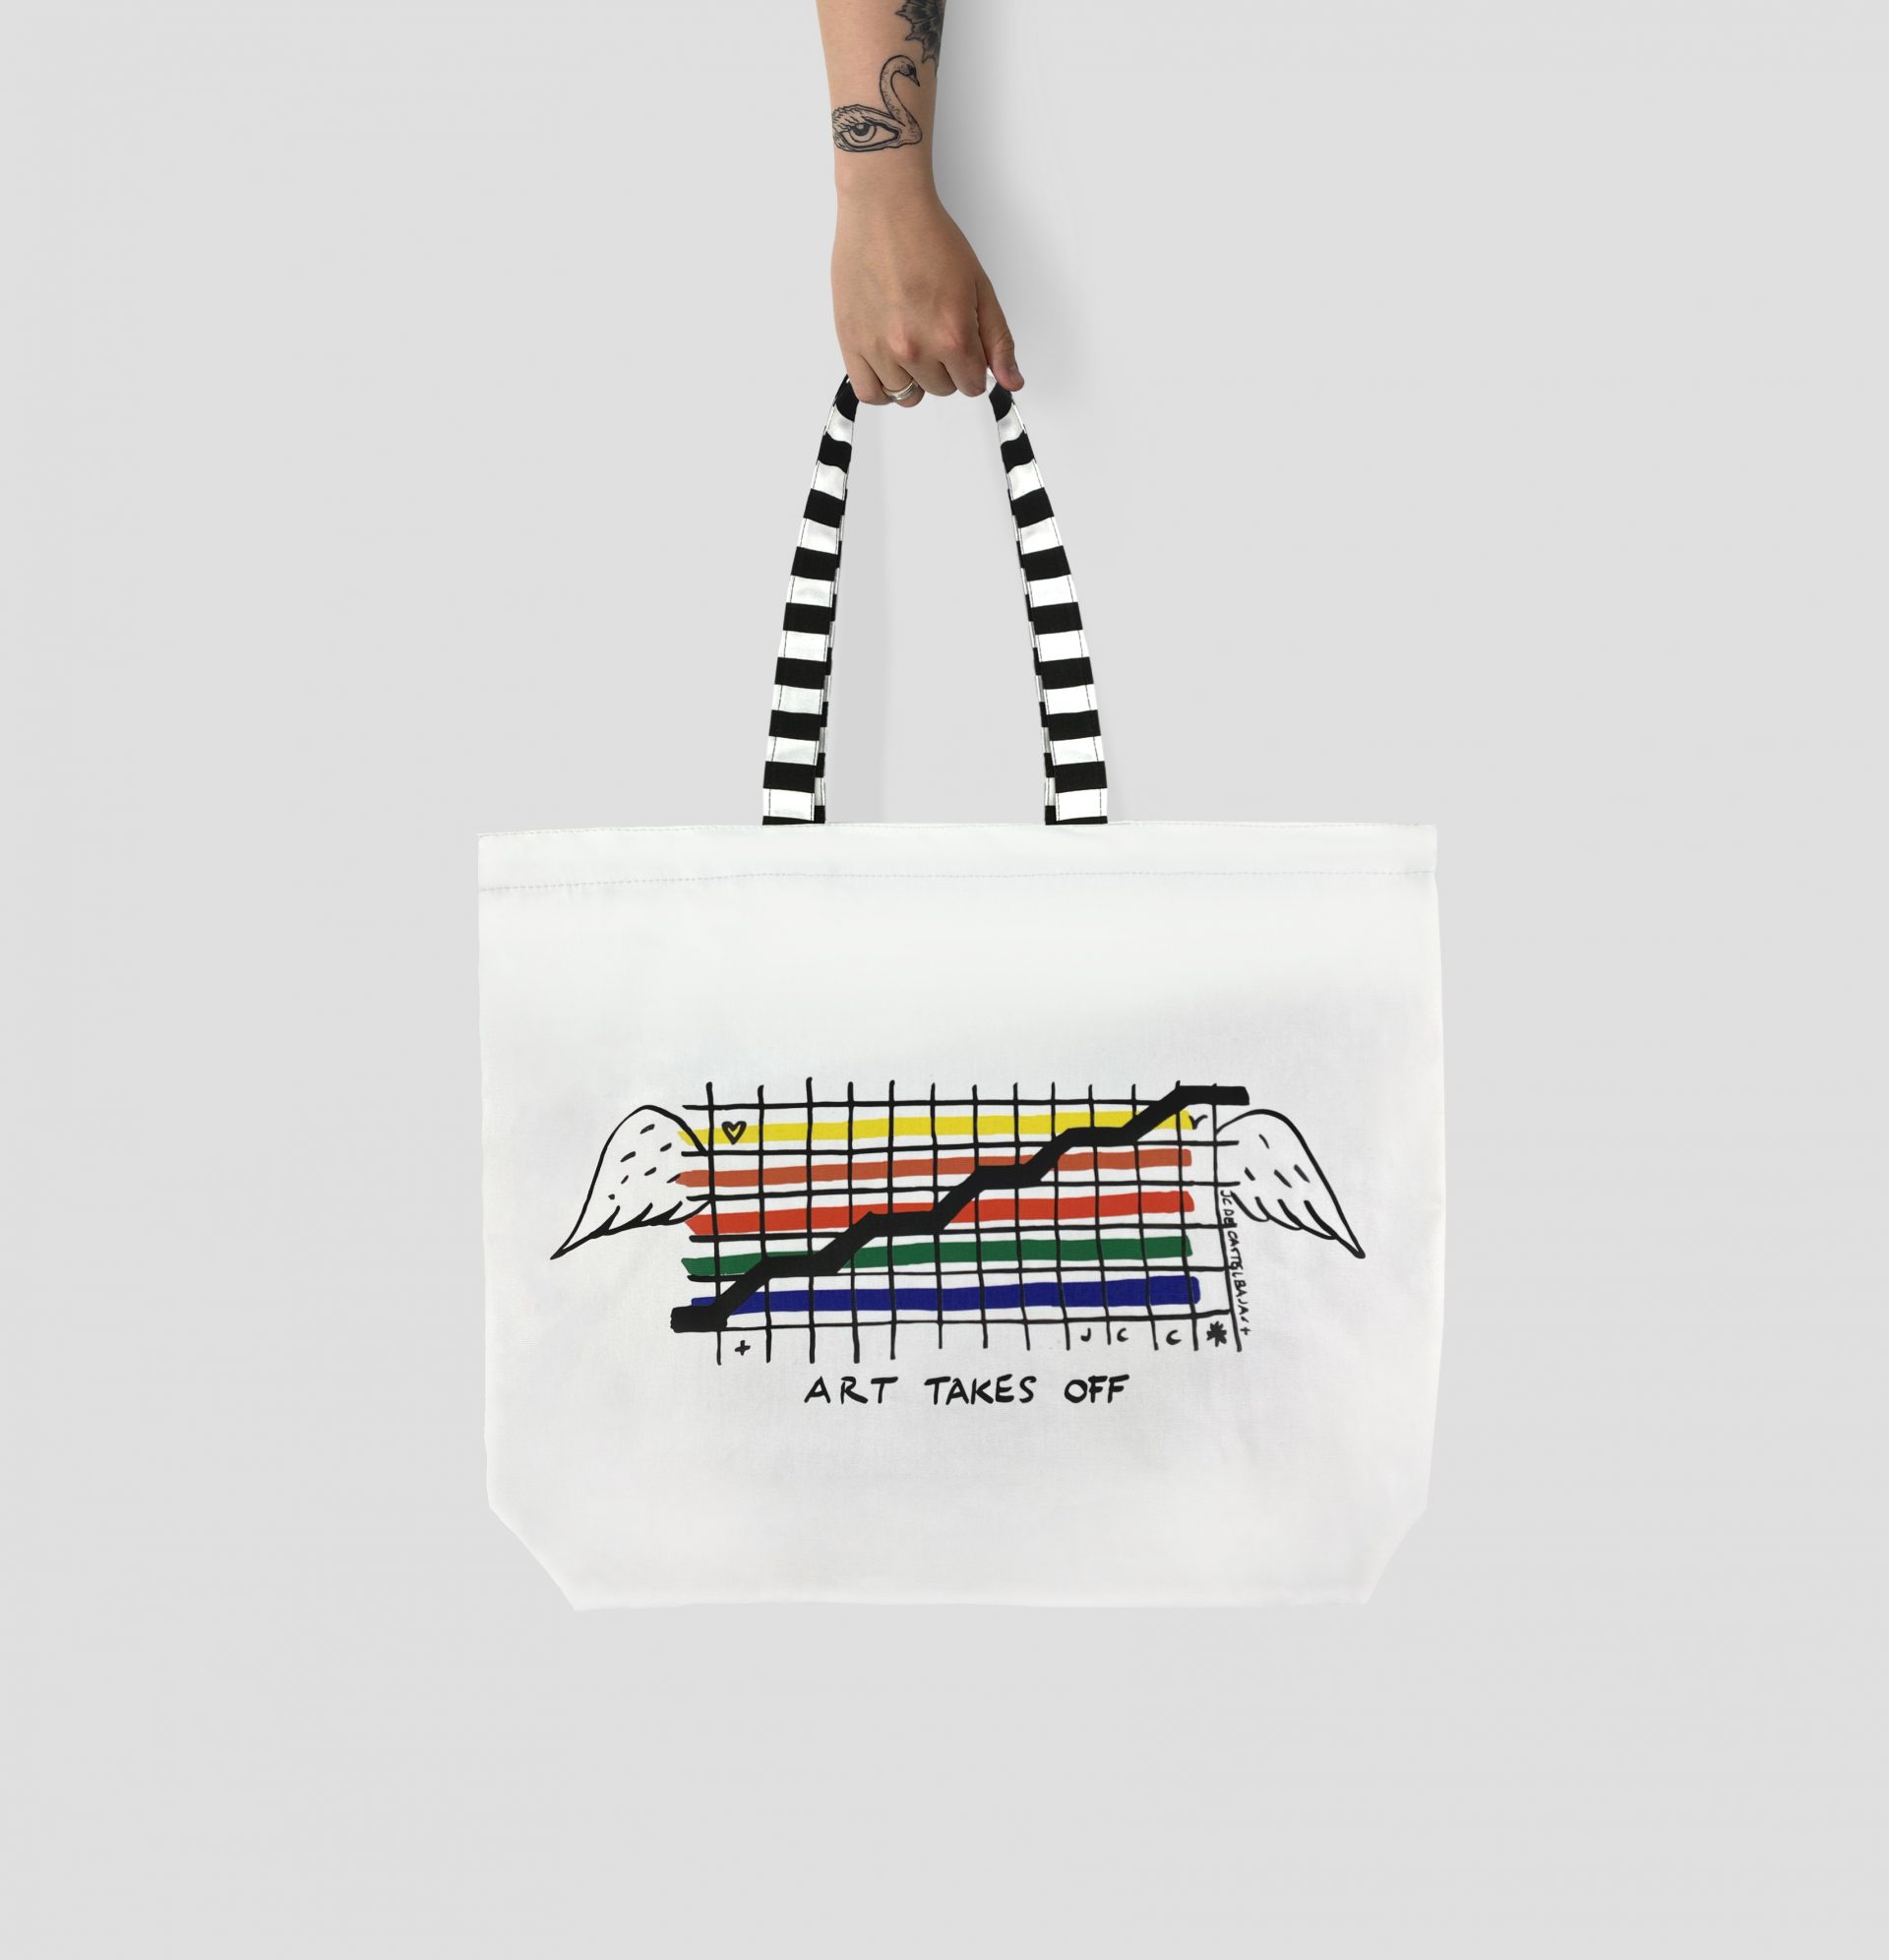 Large lined tote bag by Paul Bristows for the new Pompidou collection designed by Jean-Charles de Castelbajac